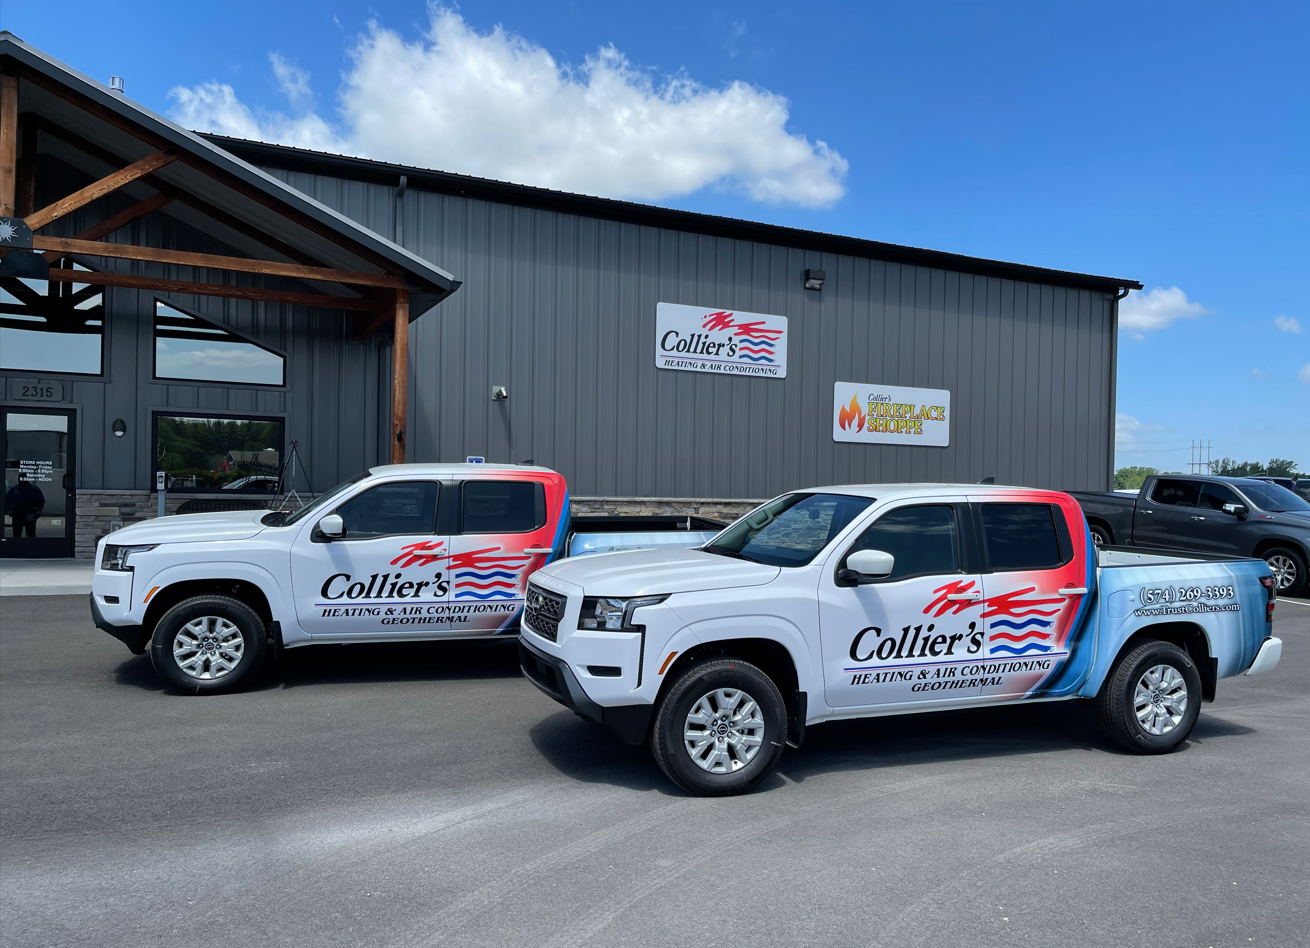 Collier's Heating & Air Conditioning has served Warsaw, IN since 1987